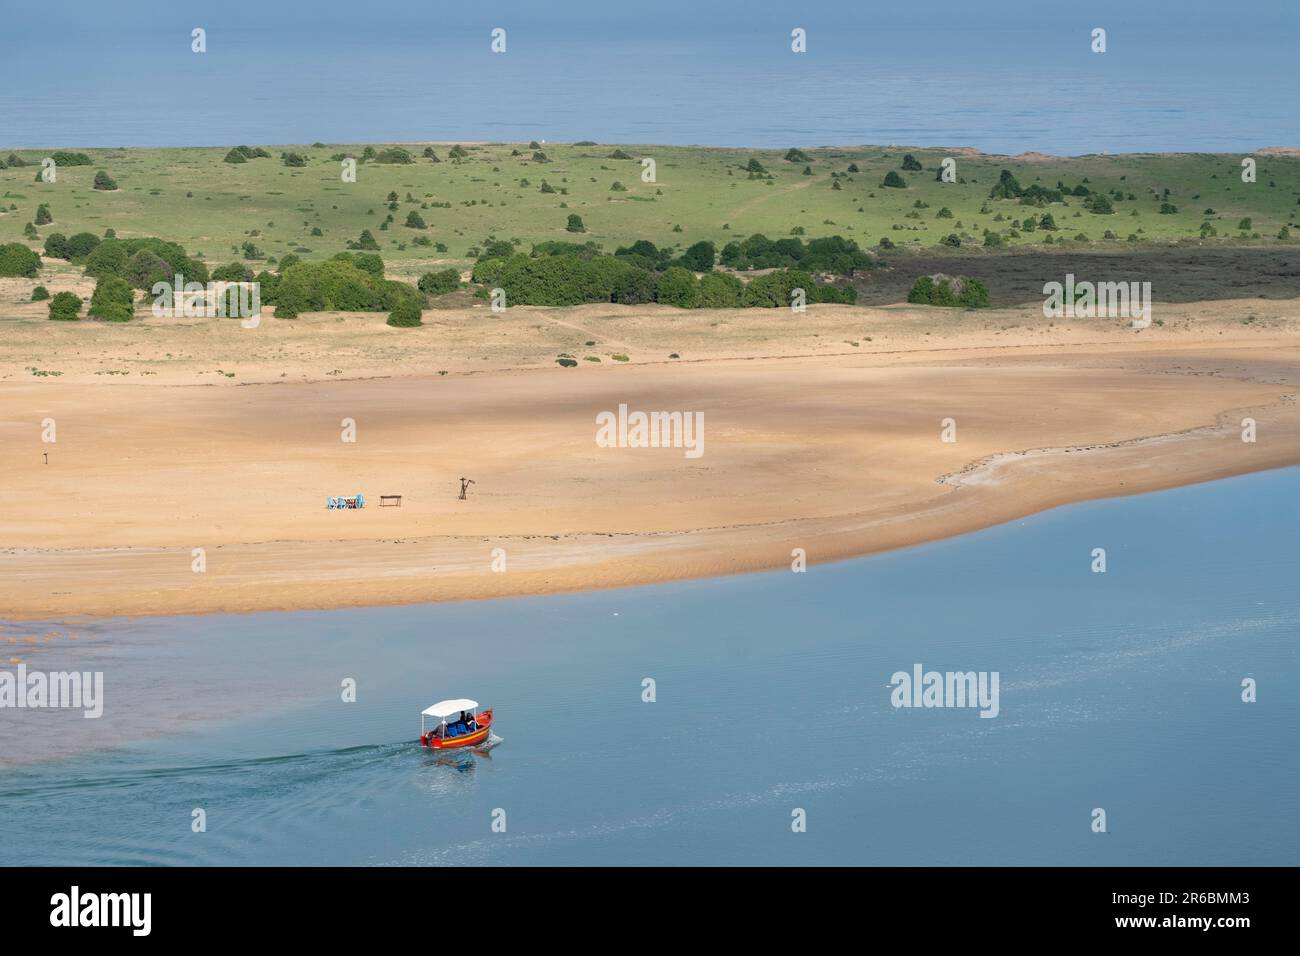 A solitary boat in the still waters of the lagoon at the Sidi Moussa-Oualidia RAMSAR protected wetlands near the town of Oualidia in Morocco Stock Photo